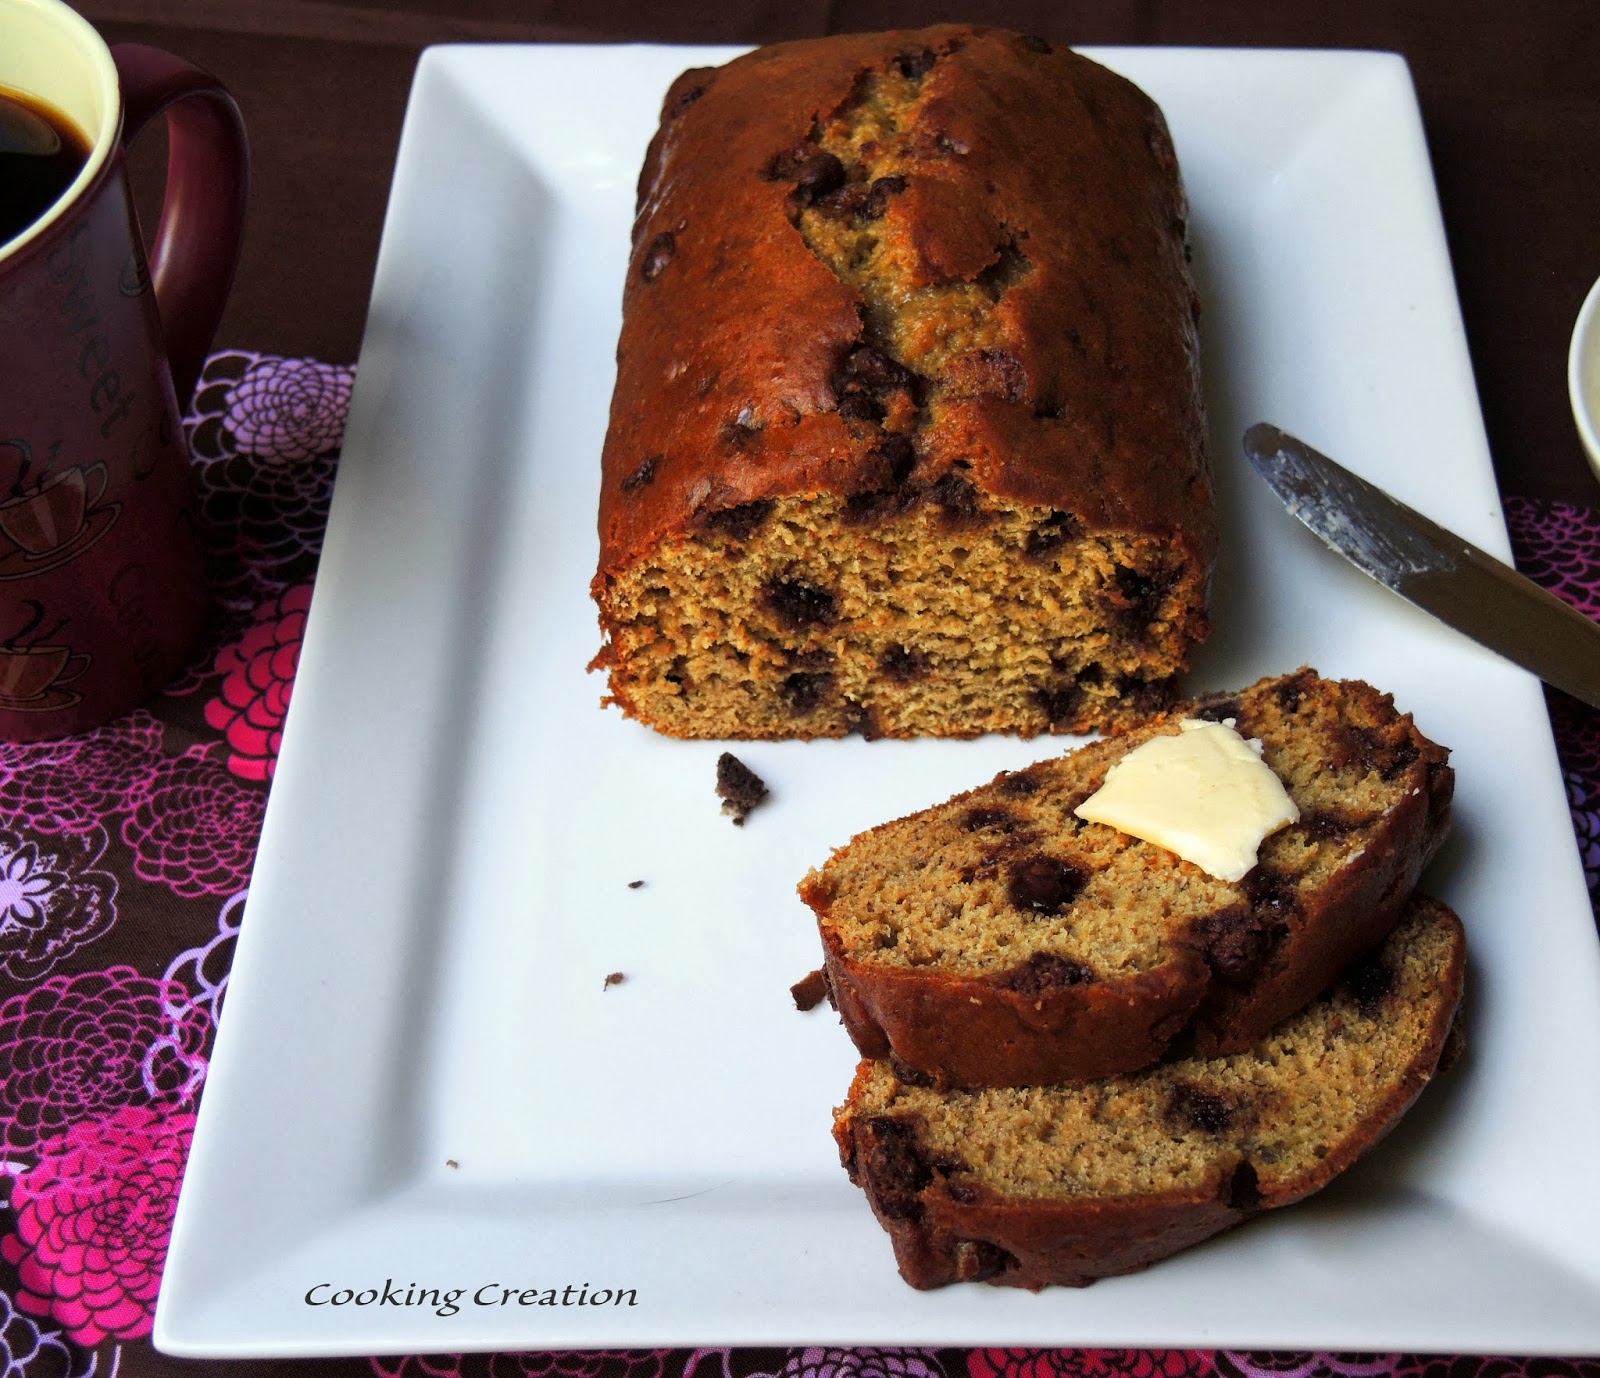 Cooking Creation: Sour Cream Banana Bread with Chocolate Chips